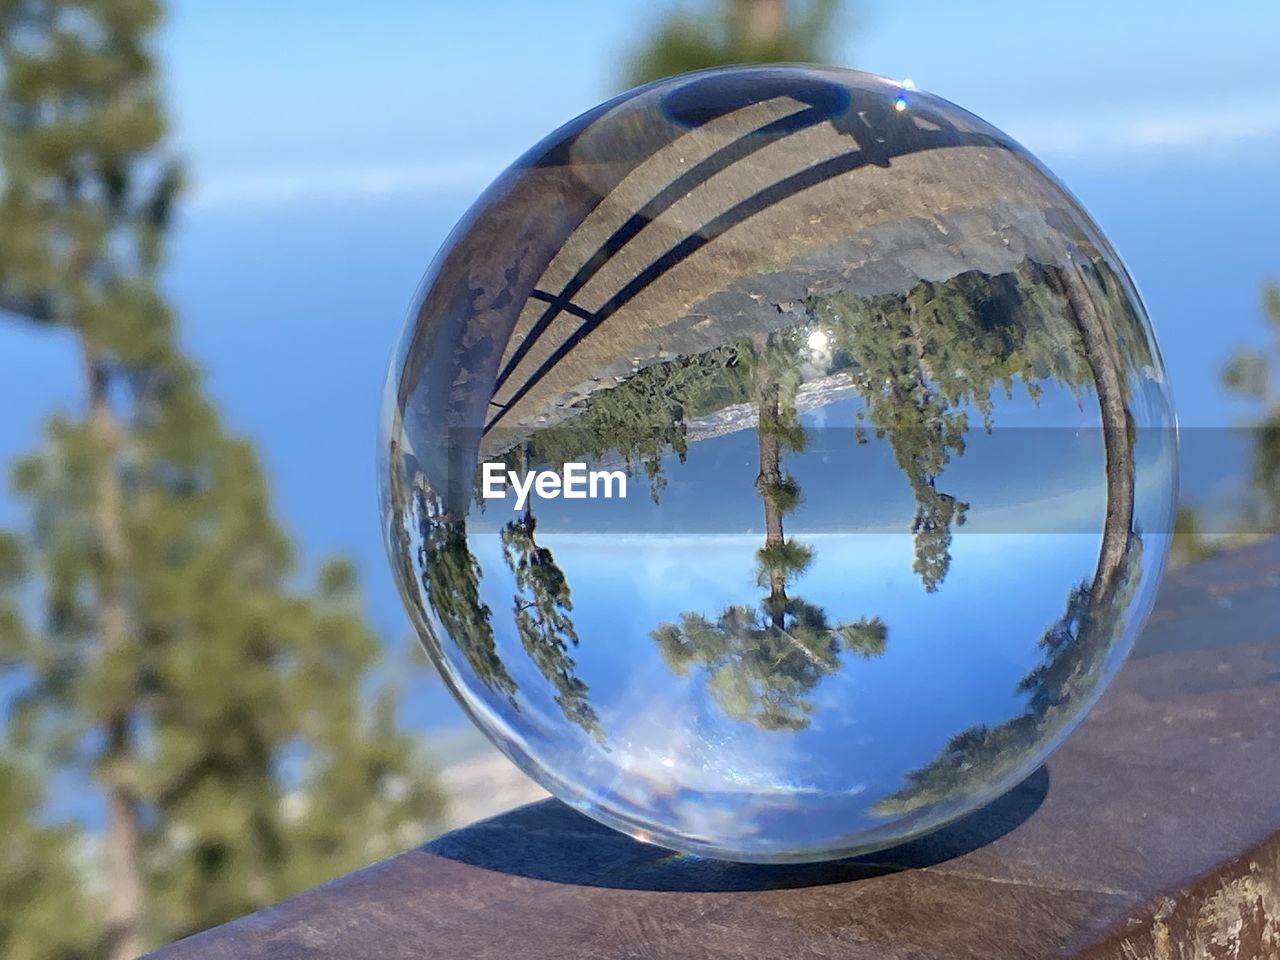 sphere, blue, reflection, nature, sky, globe - man made object, glass, shape, transparent, planet earth, tree, crystal ball, no people, water, day, close-up, focus on foreground, outdoors, geometric shape, environment, planet, space, plant, sunlight, circle, single object, land, ball, shiny, physical geography, cloud, landscape